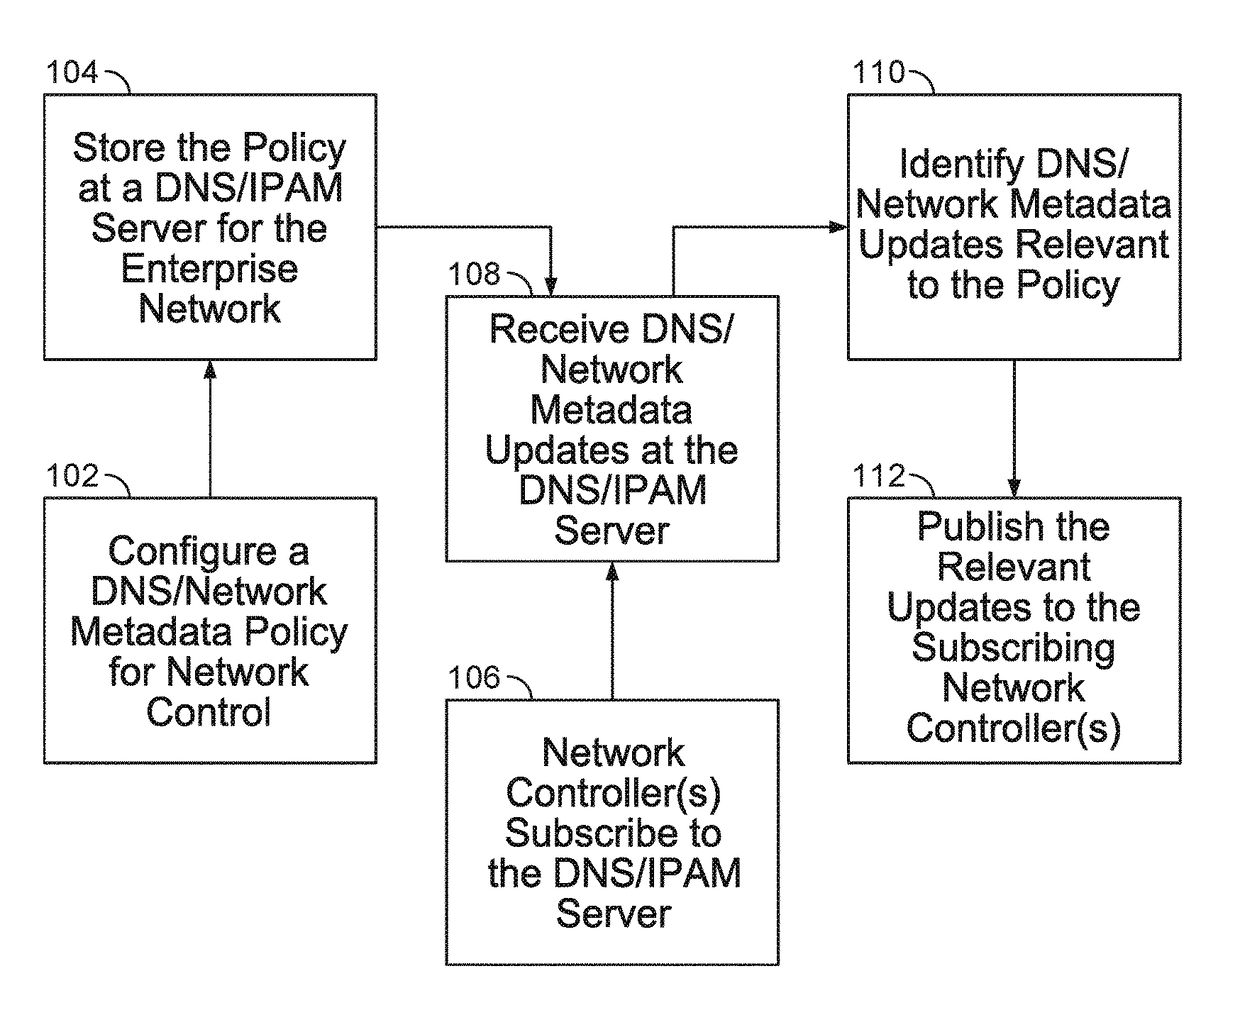 DNS or network metadata policy for network control